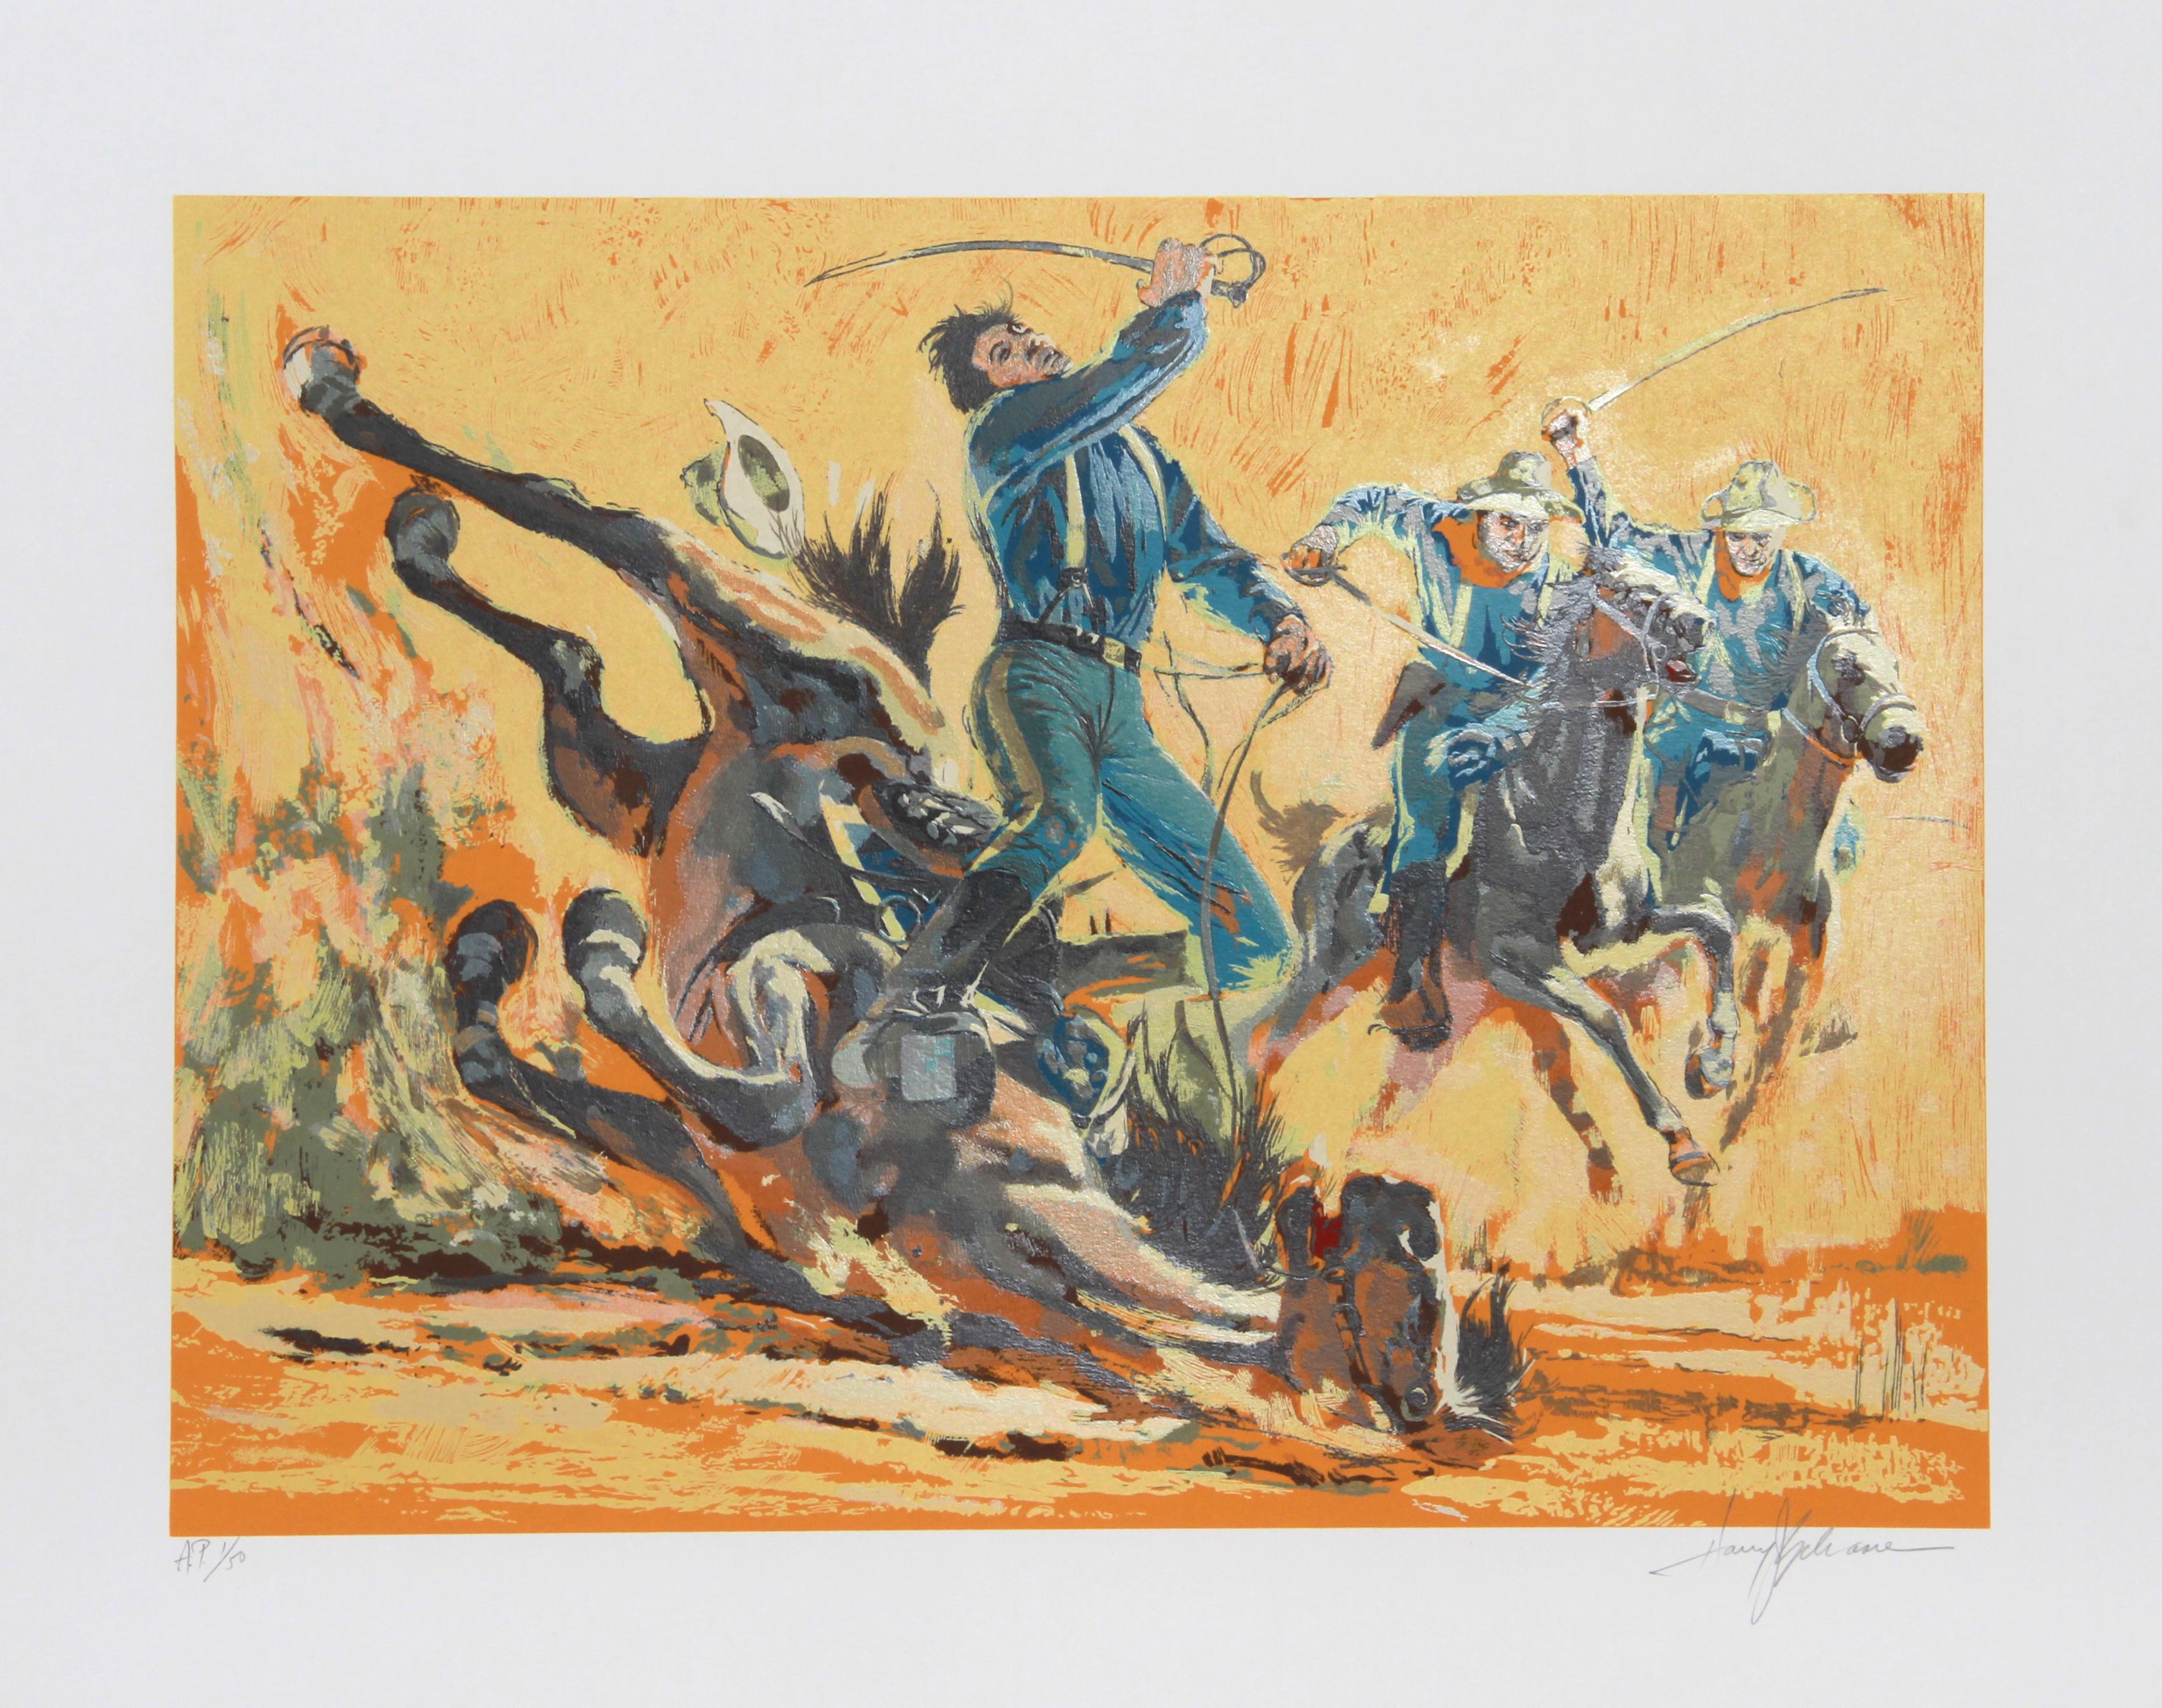 Cavalry Charge
Harry Schaare, American (1922–2008)
Date: 1979
Screenprint, signed and numbered in pencil
Edition of AP 50
Image Size: 17 x 23 inches
Size: 23 in. x 29 in. (58.42 cm x 73.66 cm)